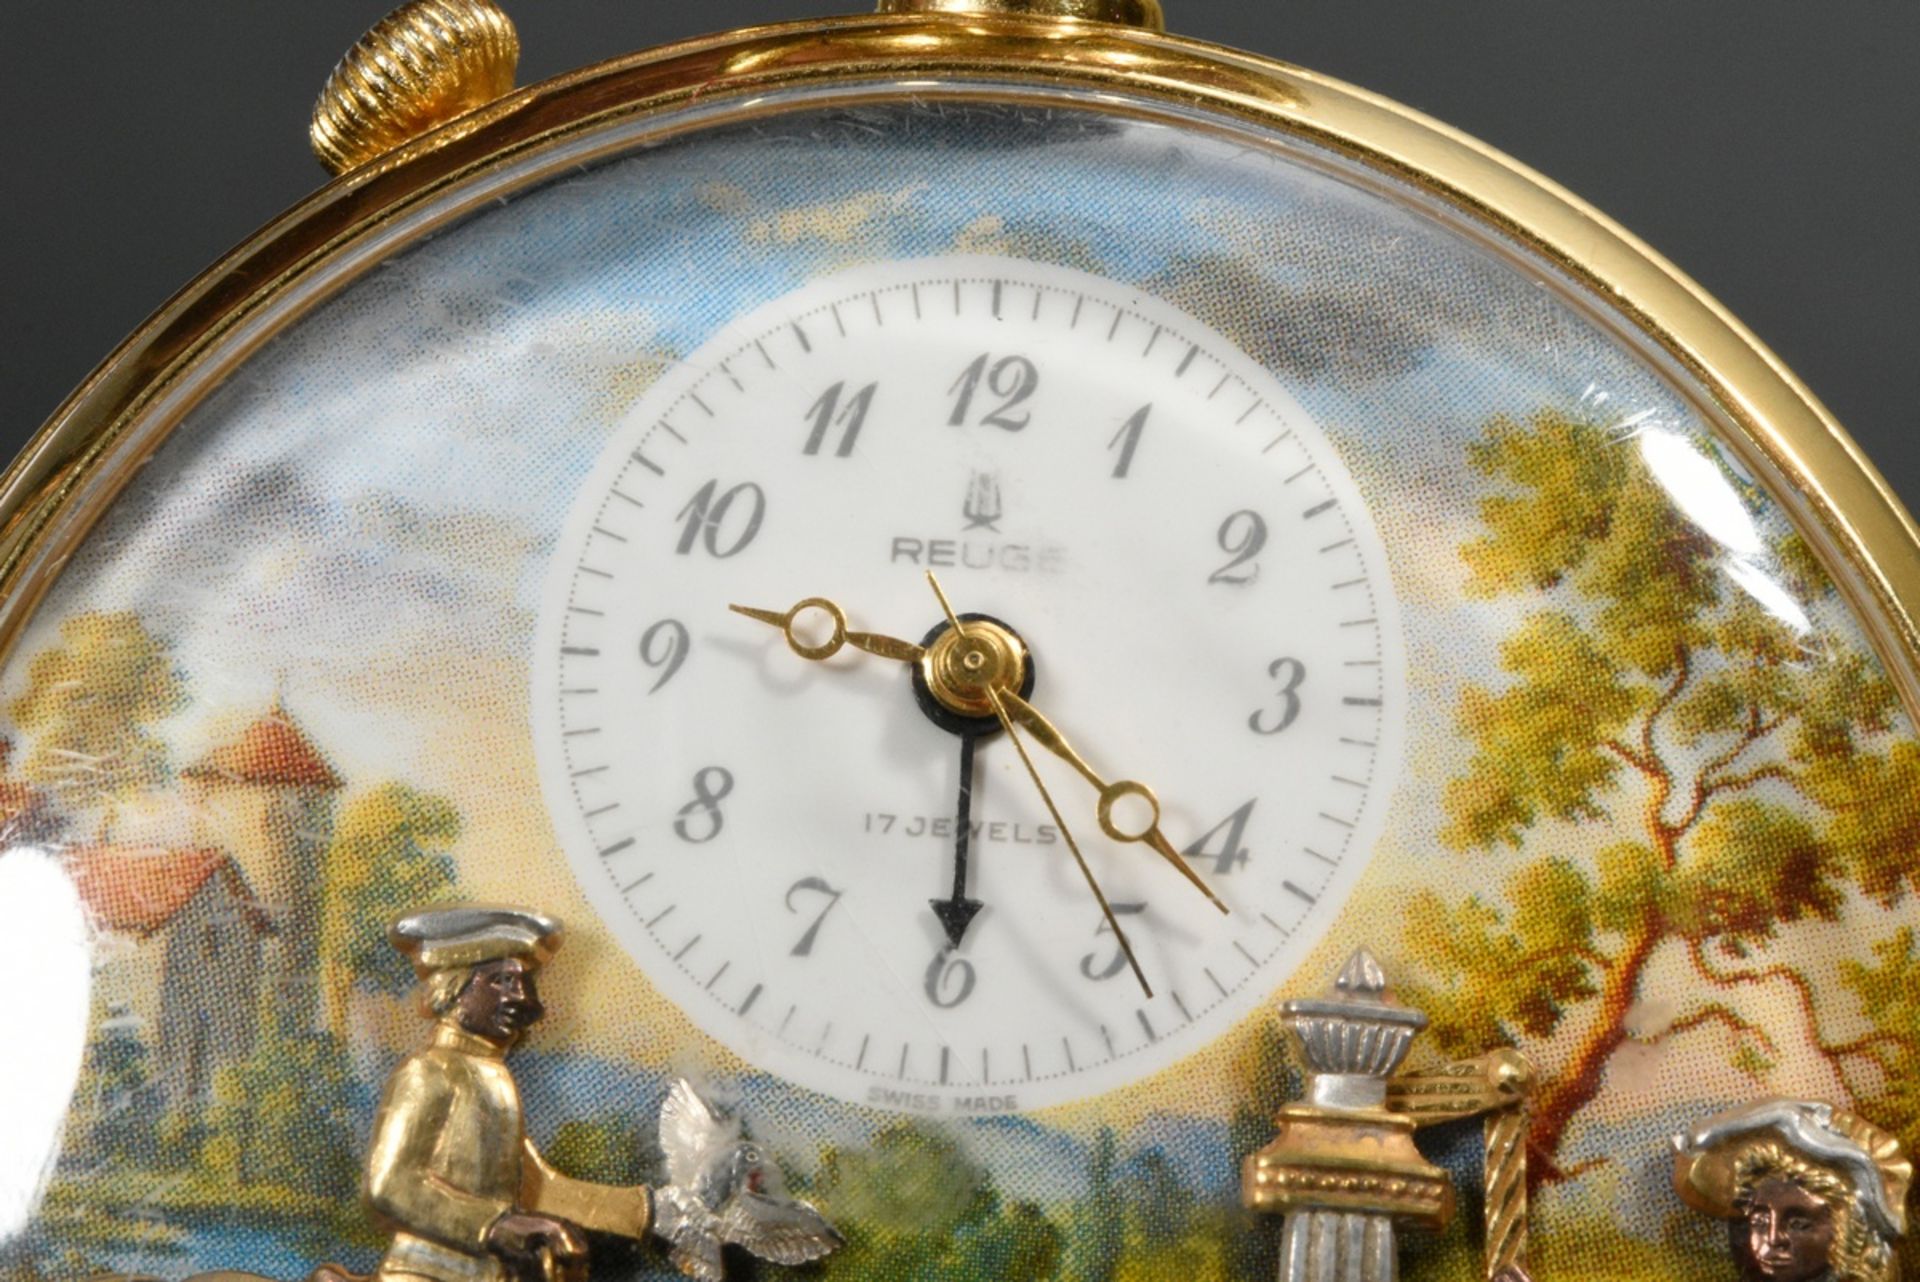 Reuge music pocket watch with alarm clock, music box and figurine automaton in silver-gilt case wit - Image 7 of 10